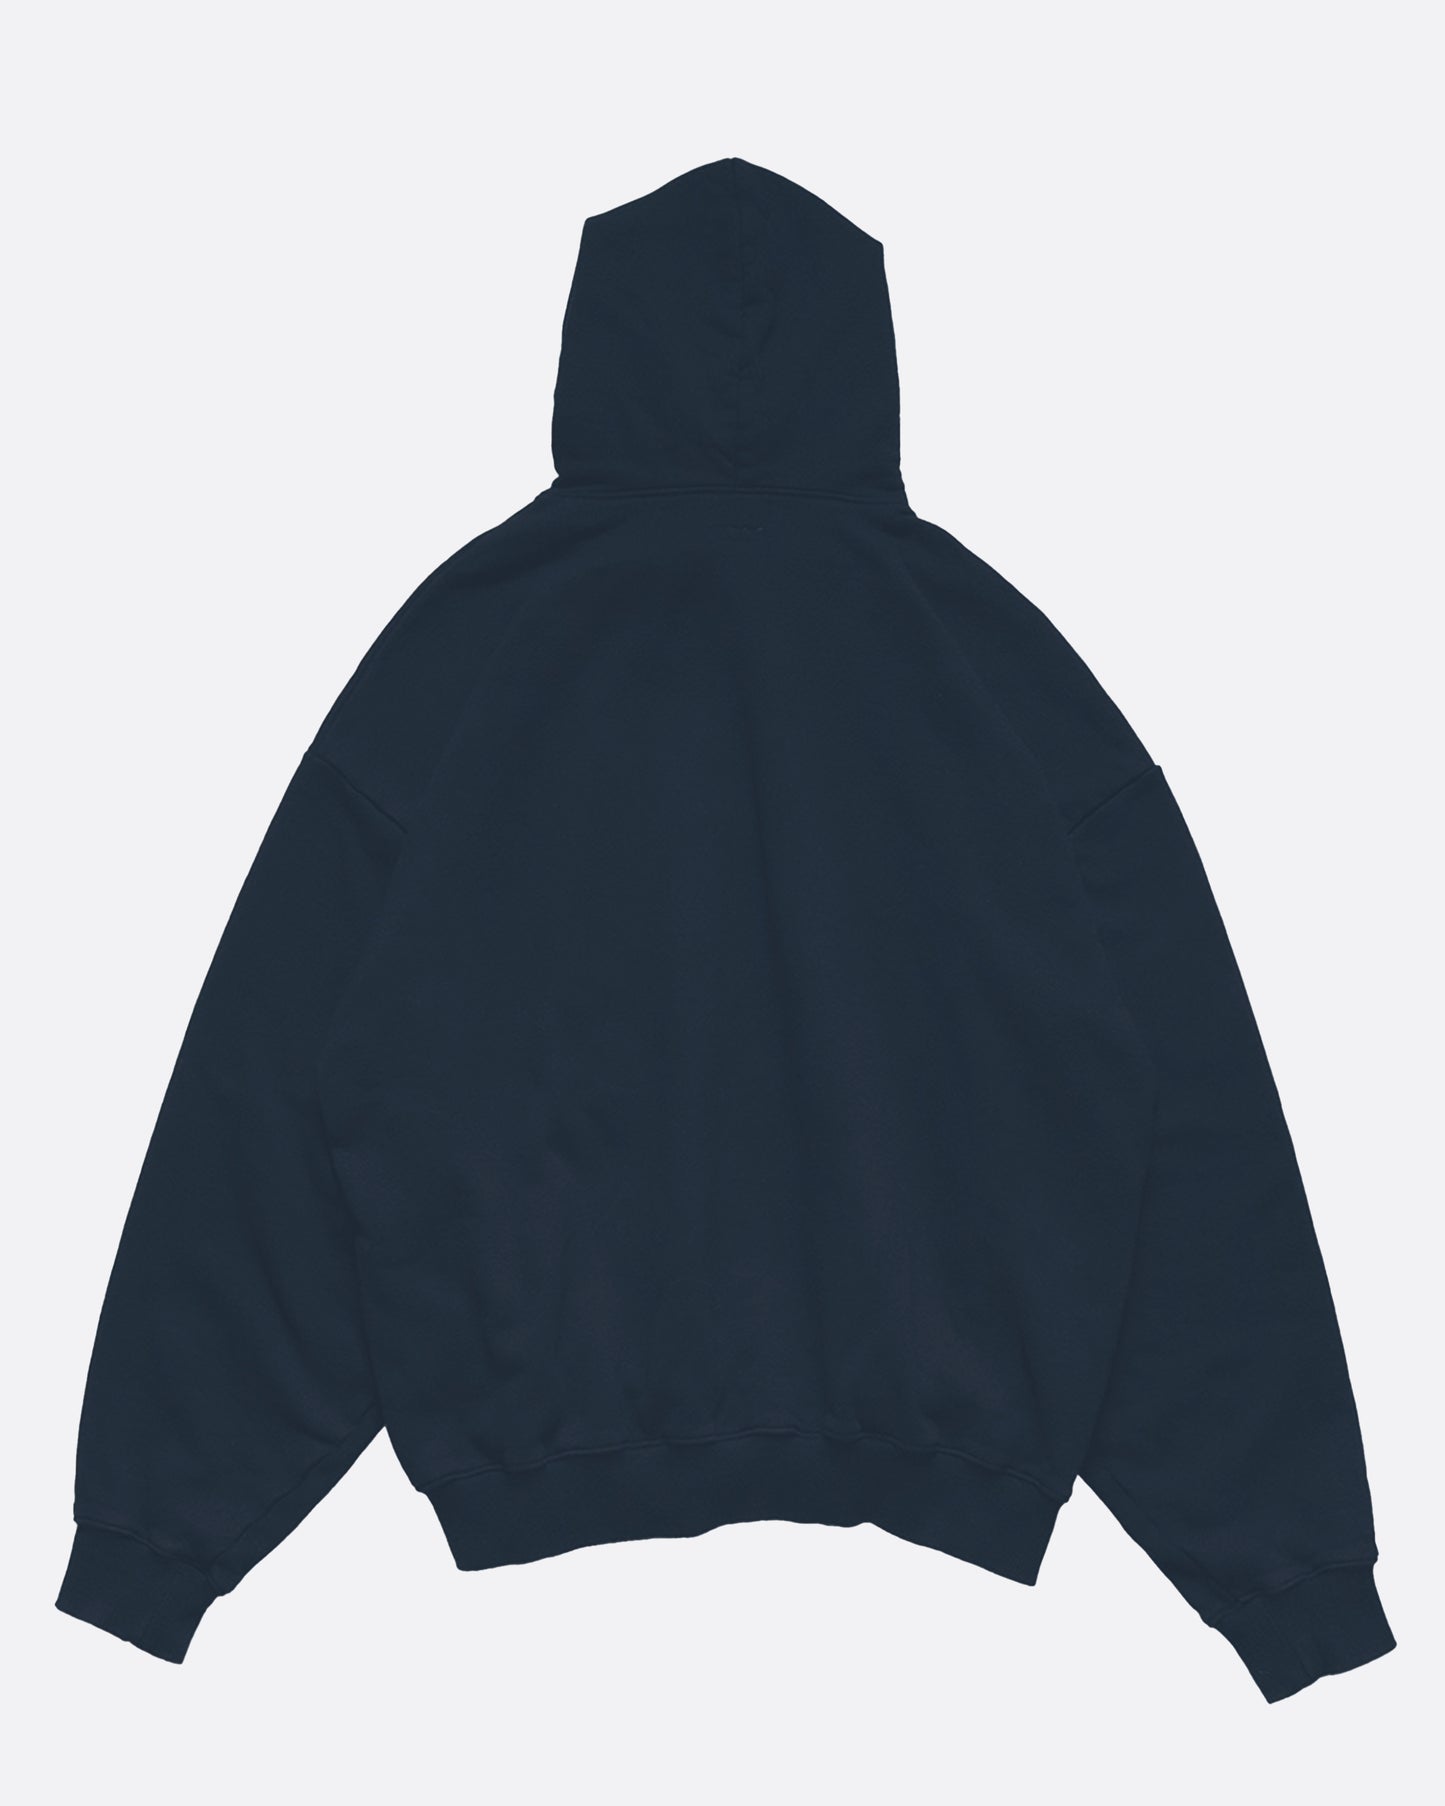 A blue cotton fleece hoodie with an oversized silhouette, accented with wide, fixed drawstrings in a geometric pattern with long red fringe.